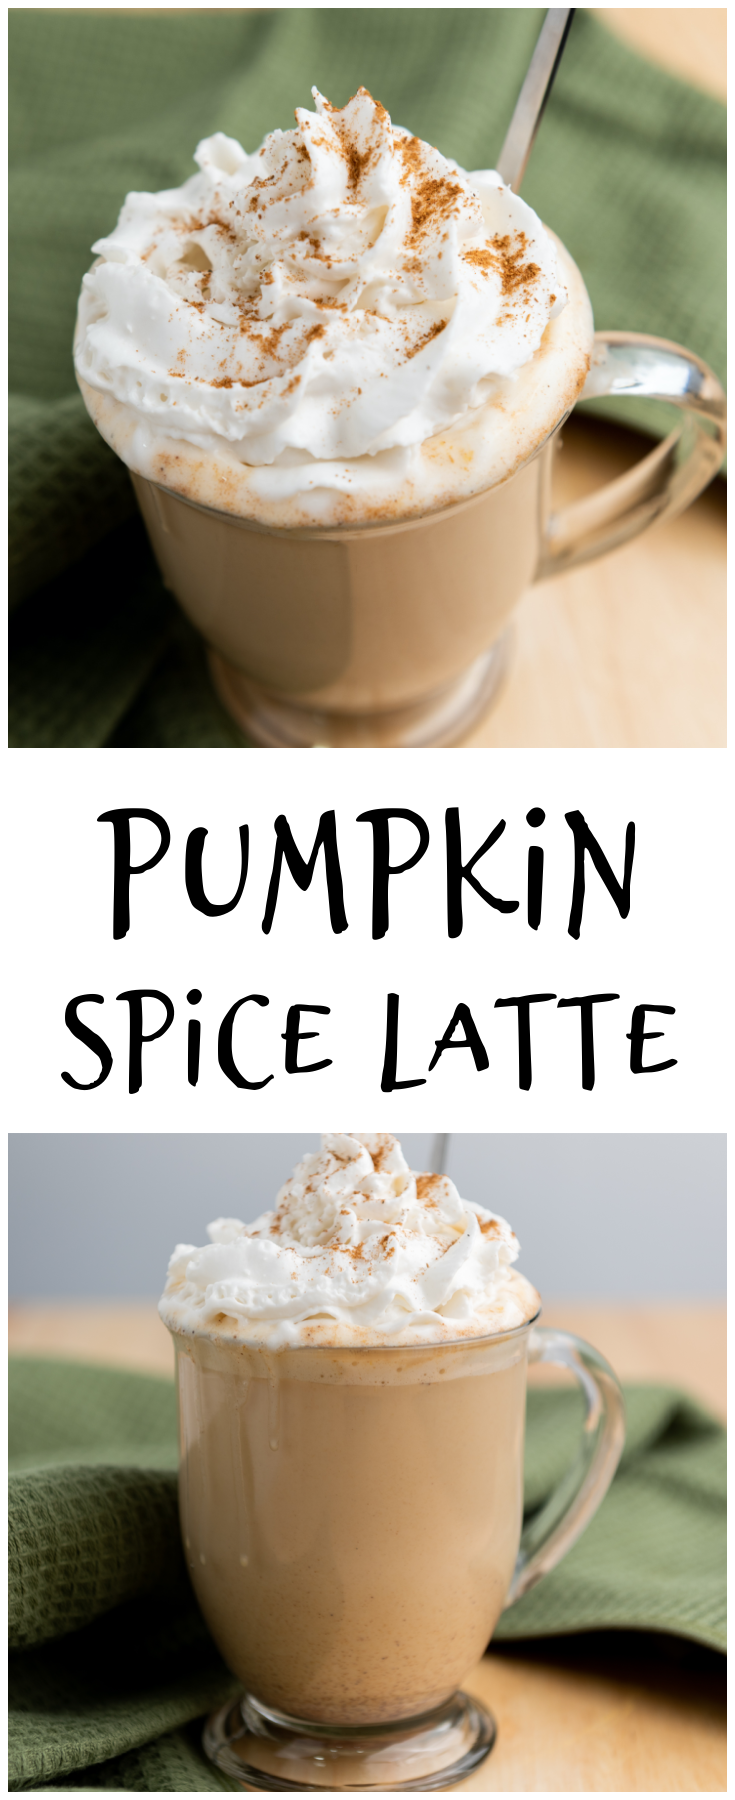 Perfect for fall, this Pumpkin Spice Latte comes together quickly and easily with your favorite milk and a few other simple ingredients that scream "fall is here!"